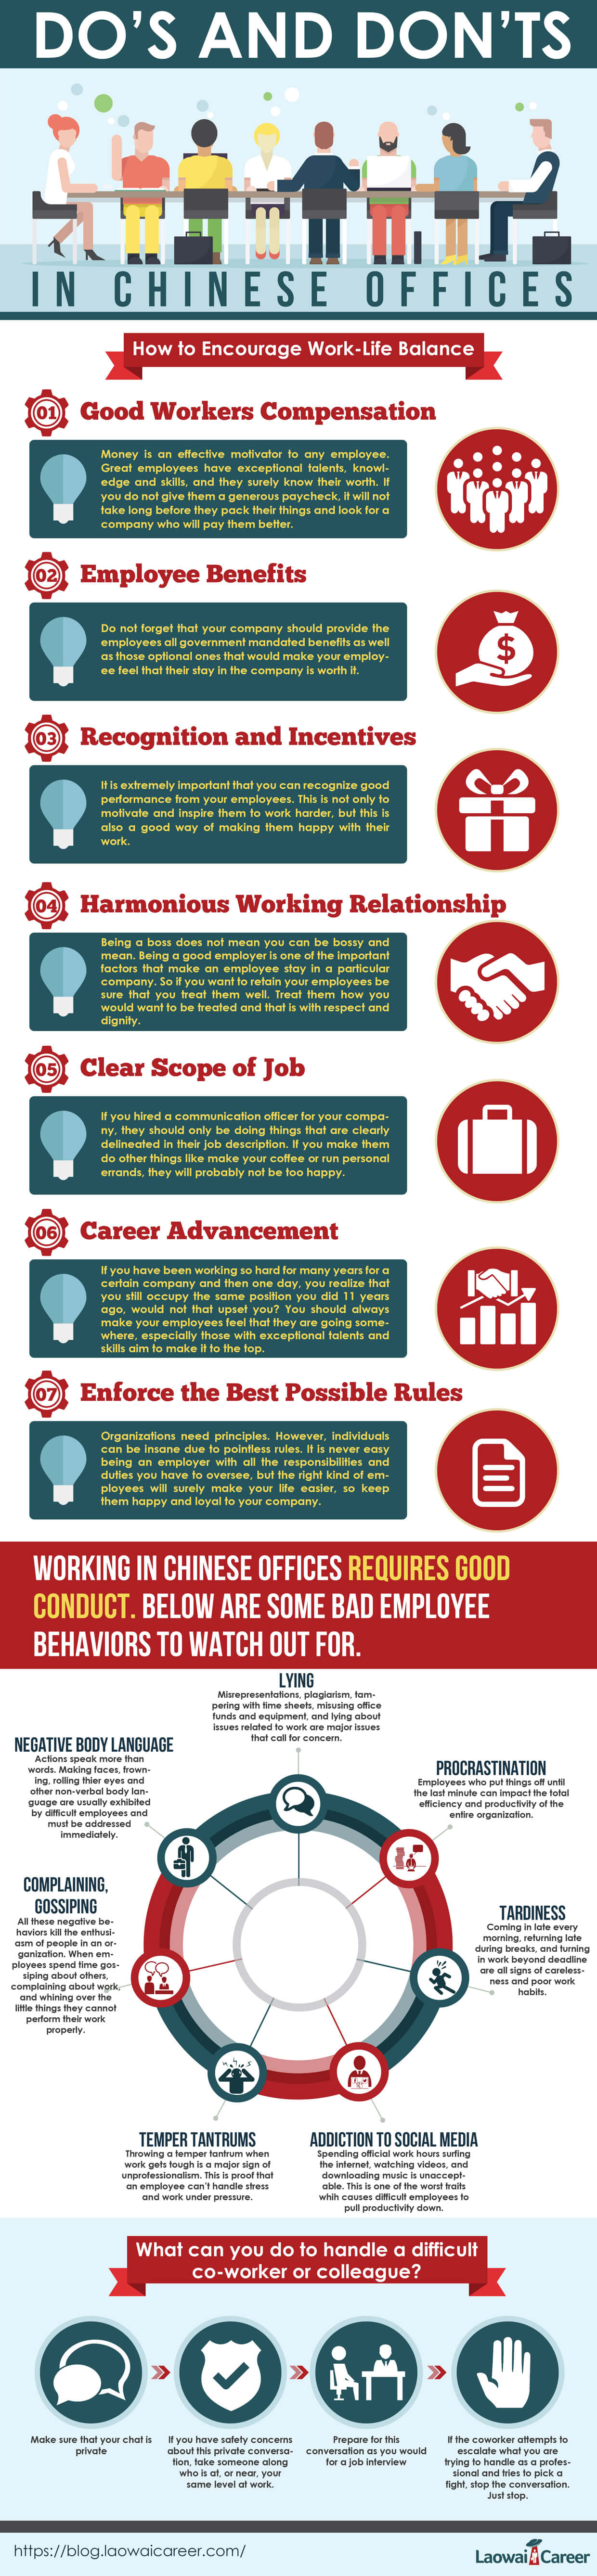 Do’s and Dont's in Chinese Offices